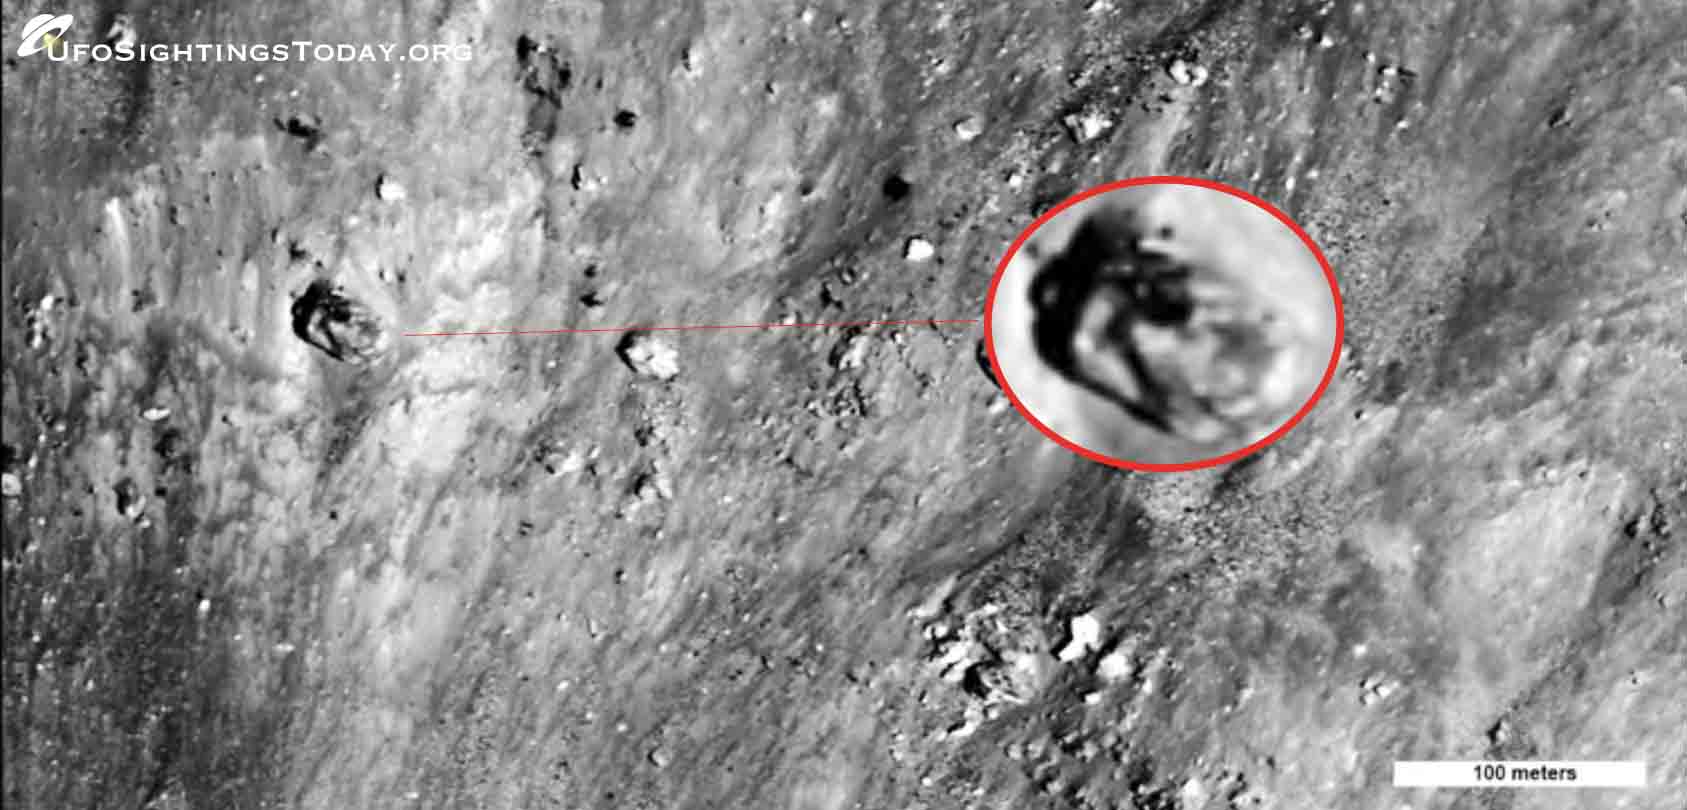 ancient tank discovered on the moon